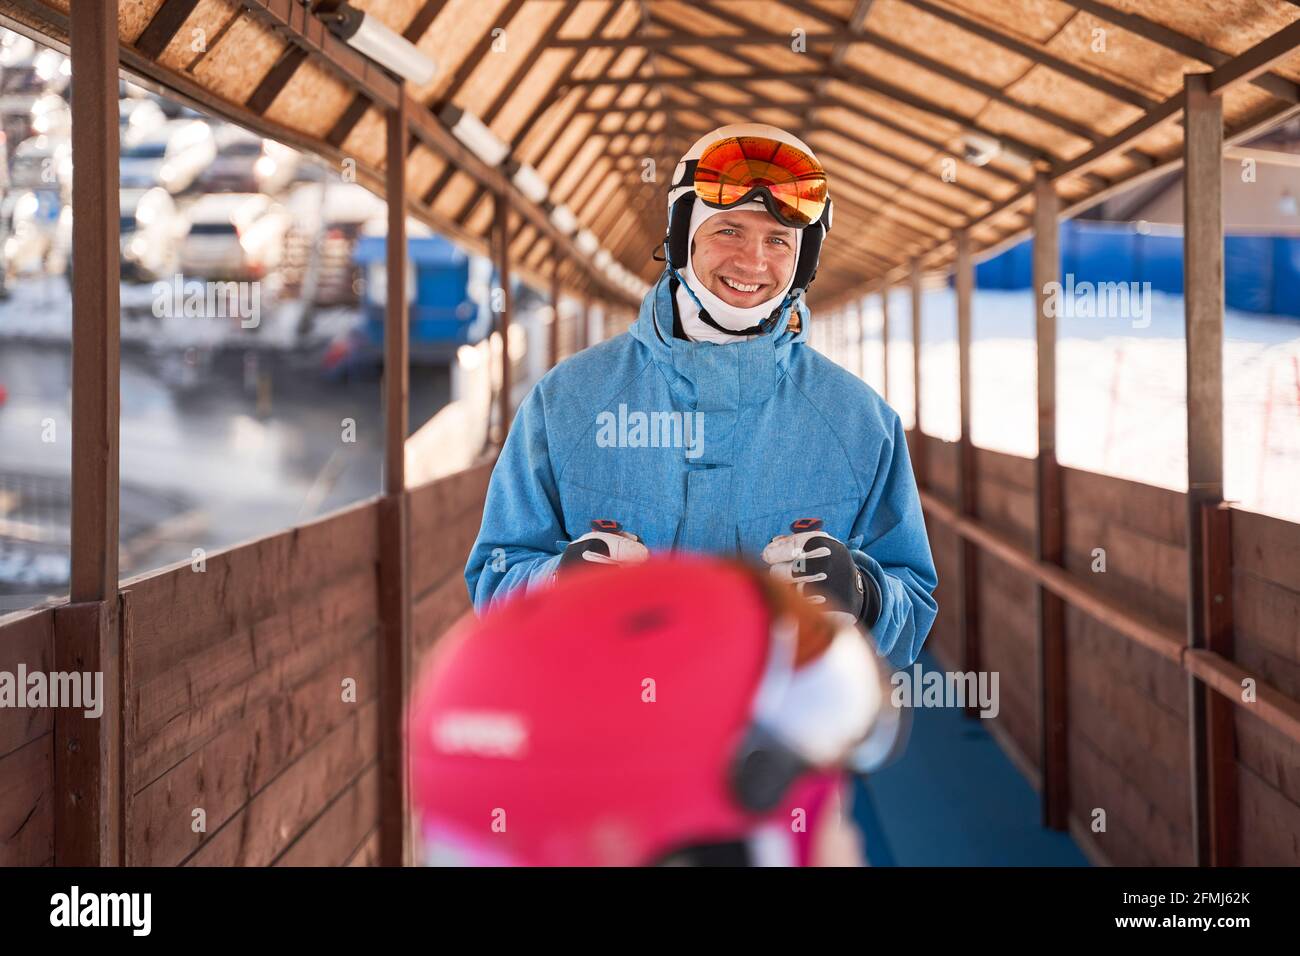 Cheerful father wearing ski helmet and warm sportswear standing in sunny outdoor sports club and looking at camera with smile Stock Photo